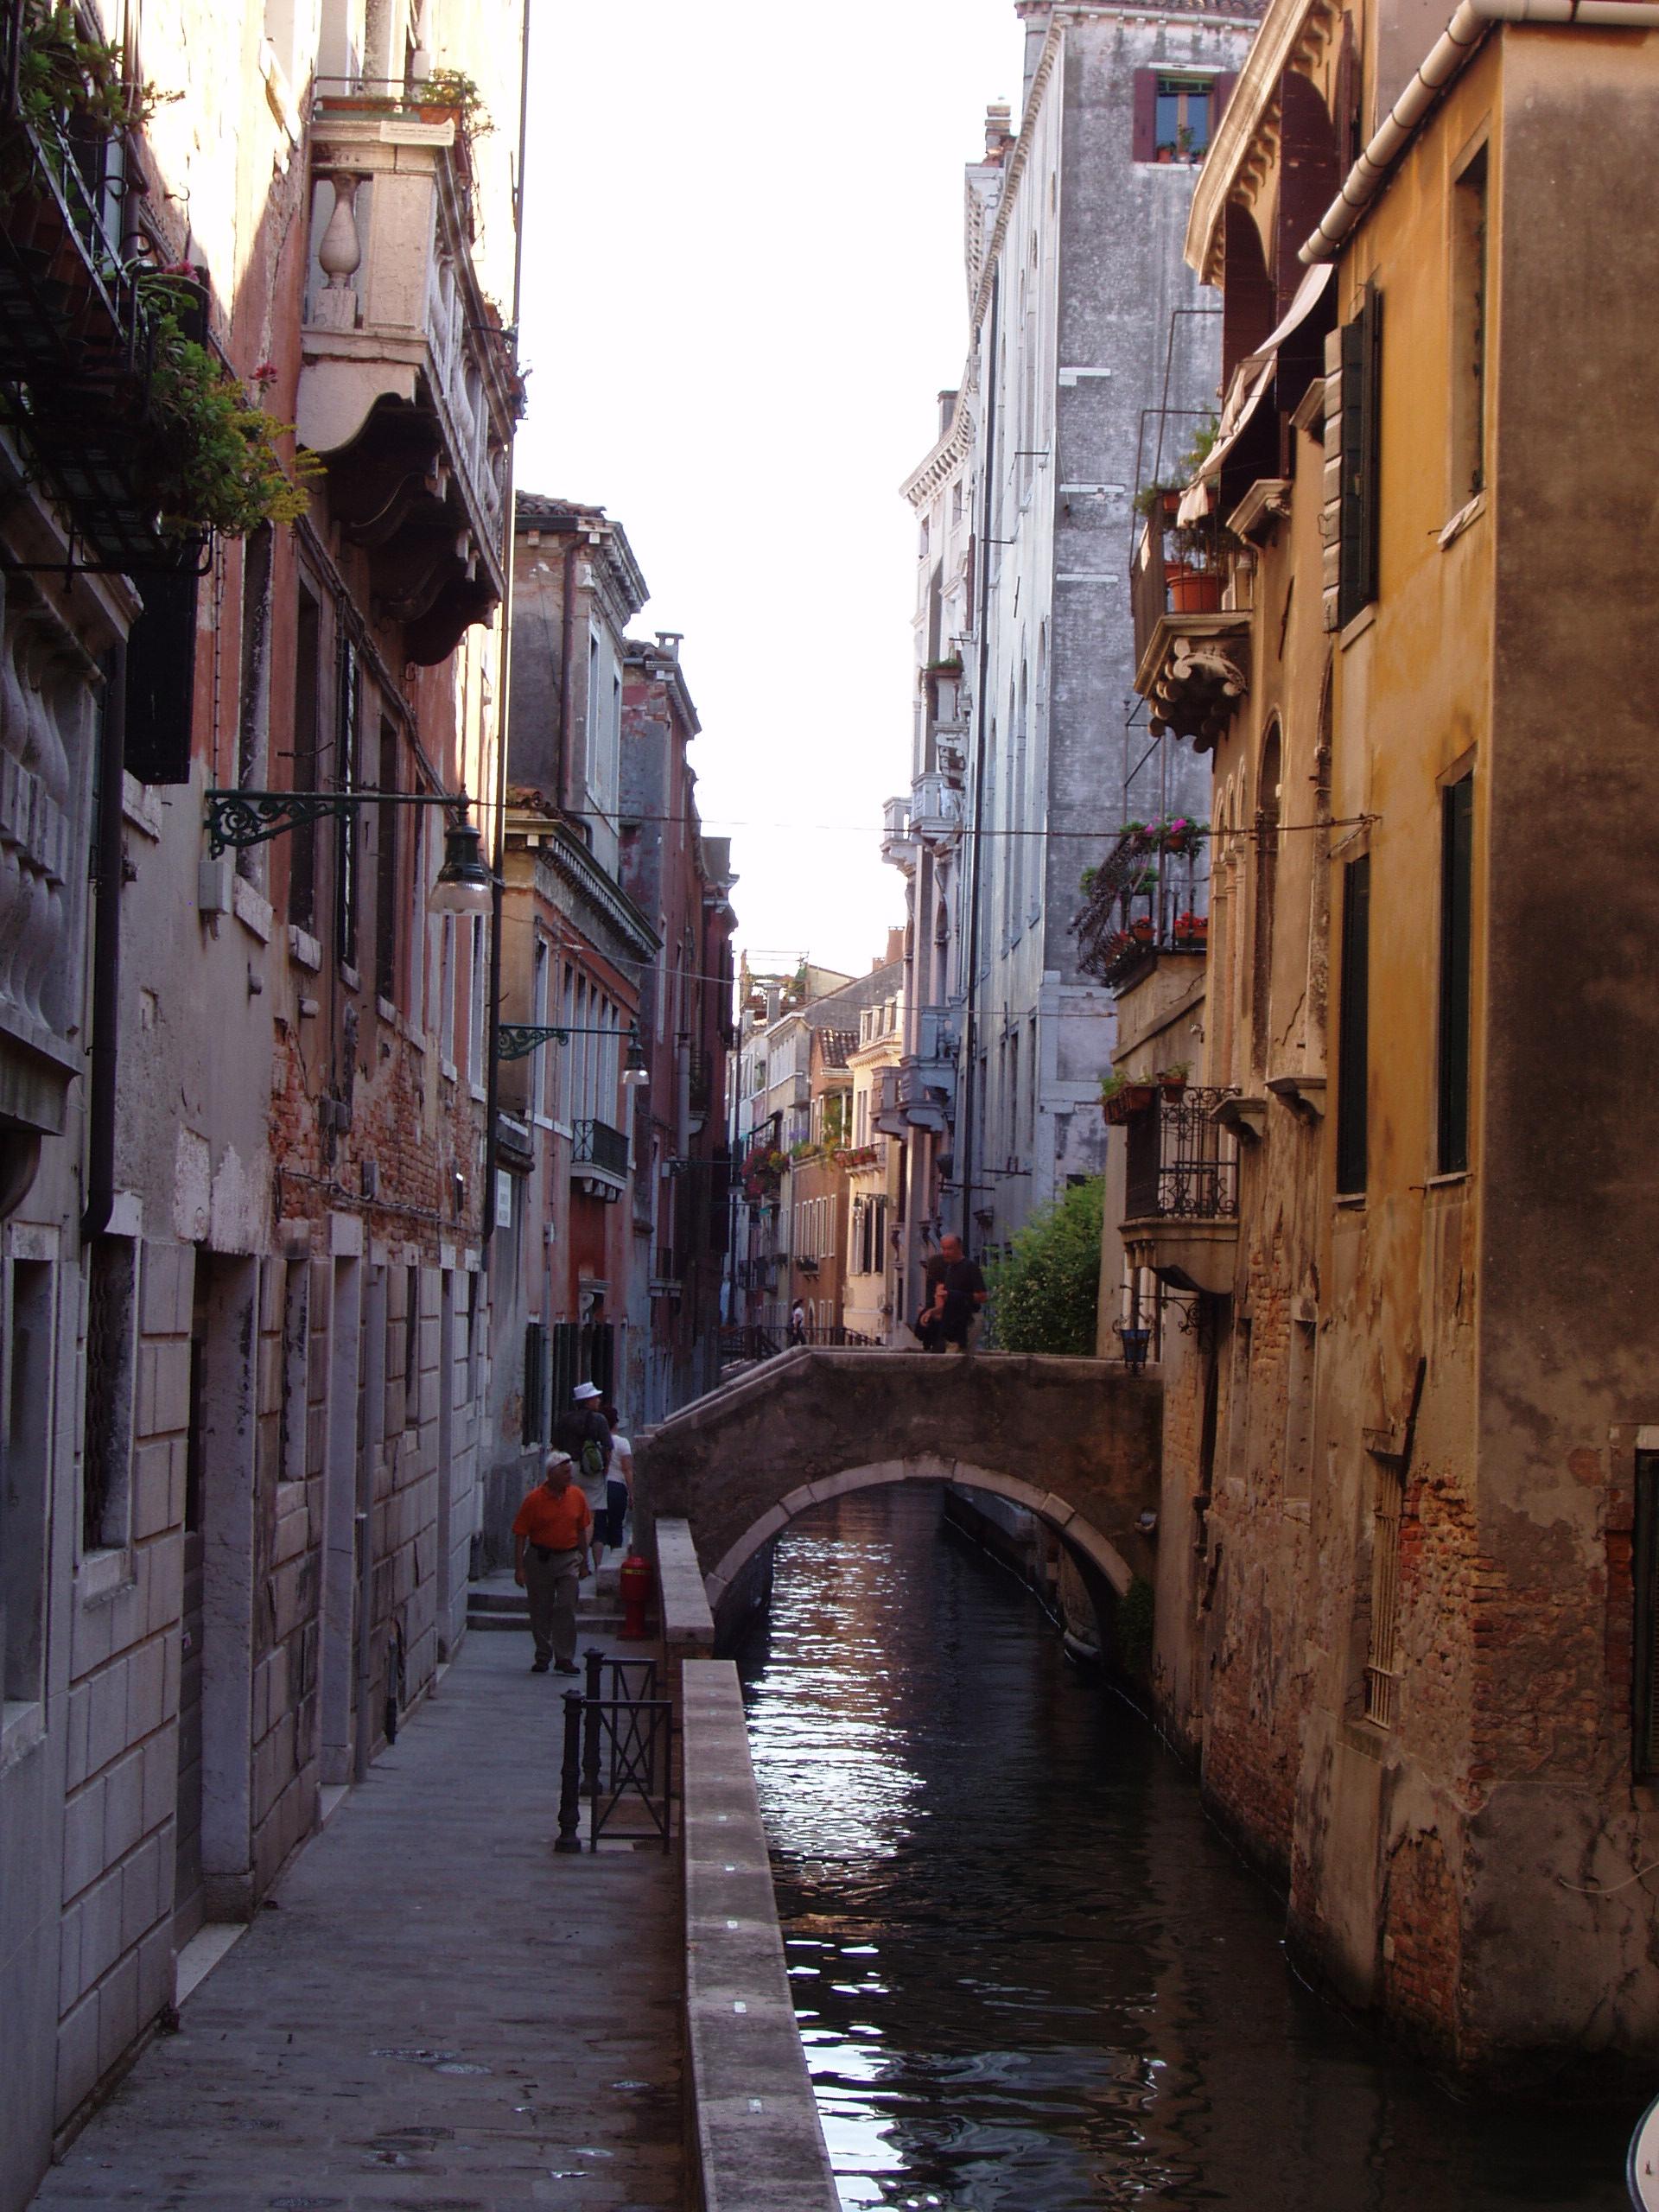 File:Venice Street and Canal.jpg - Wikimedia Commons